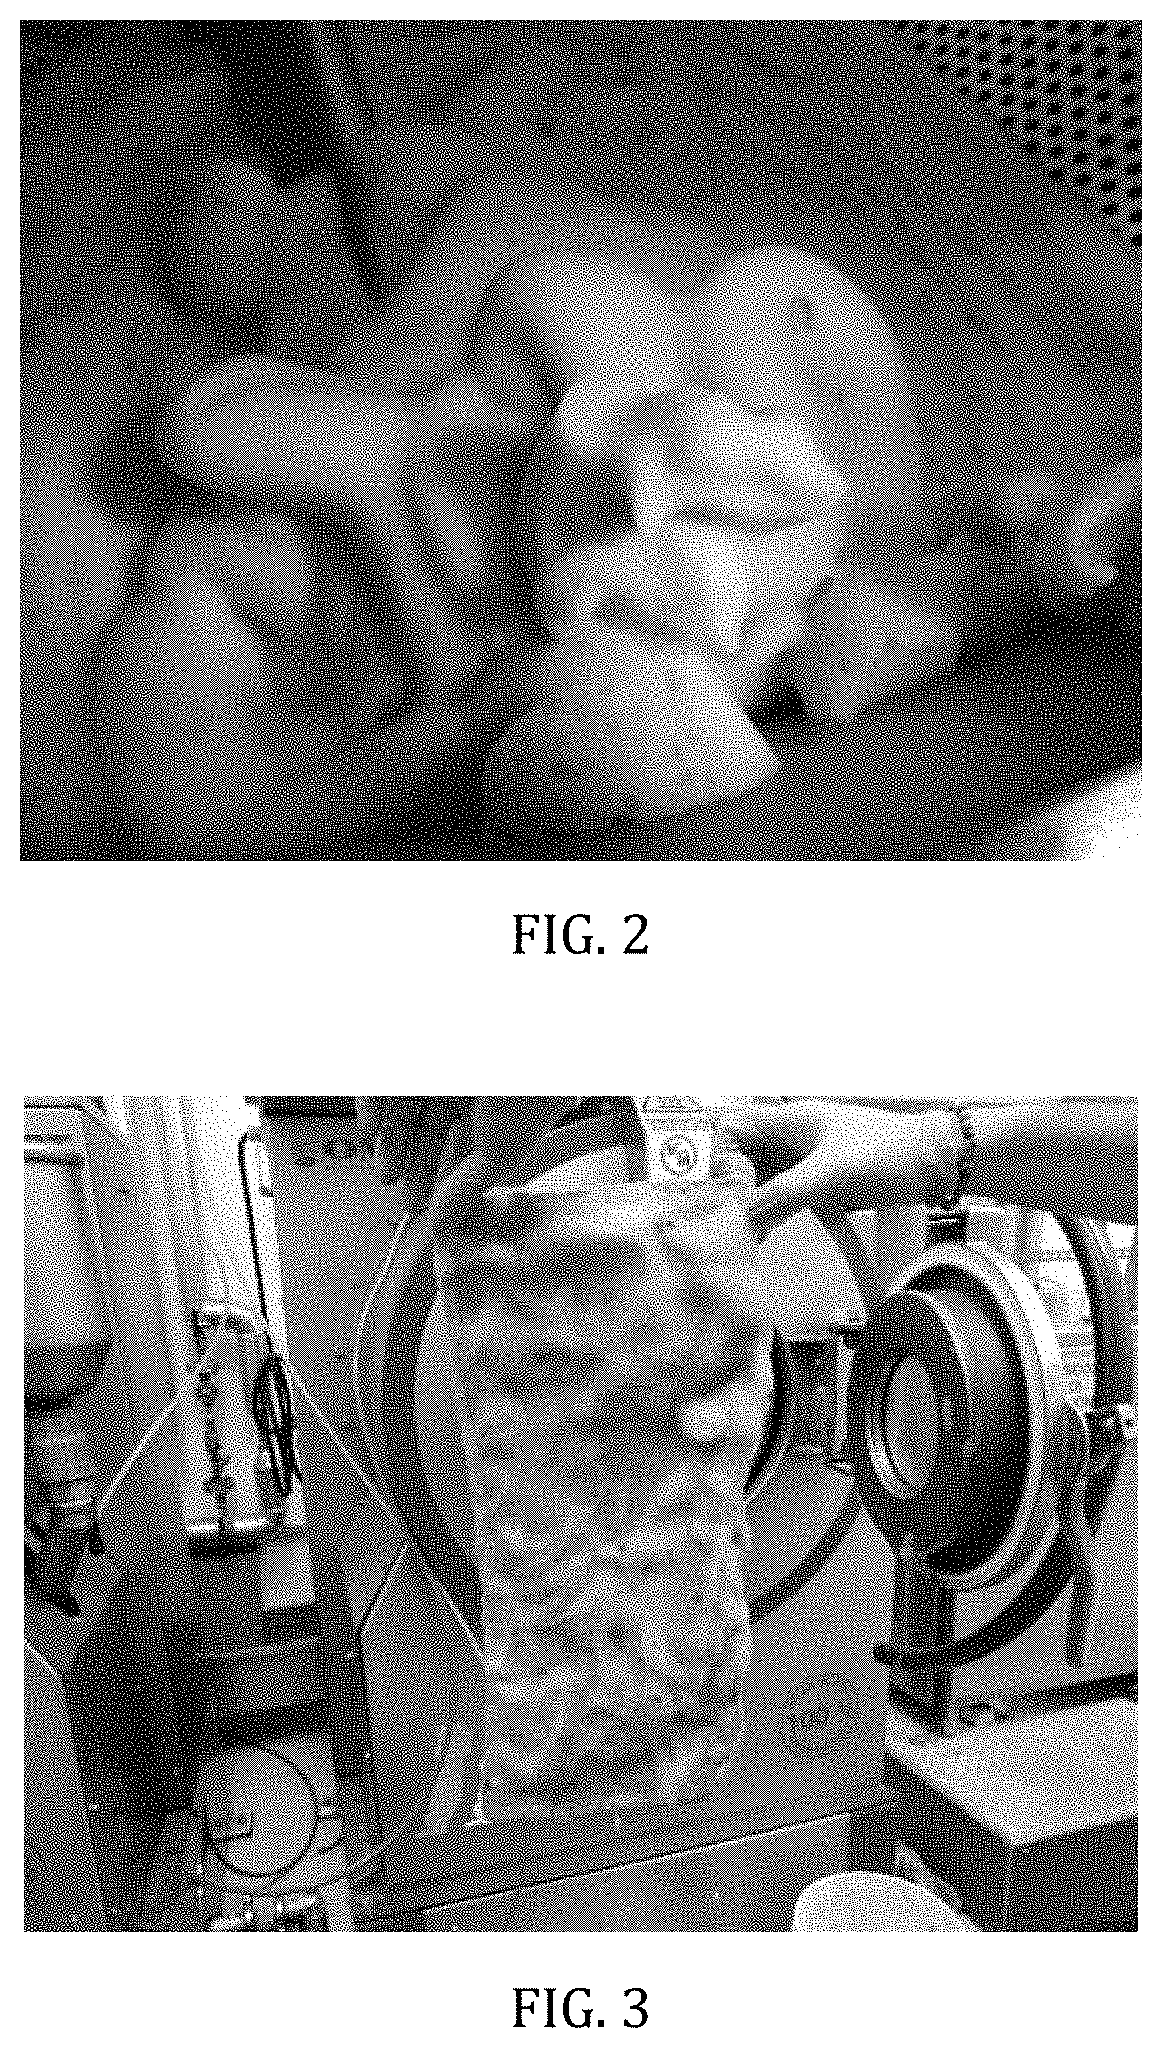 Methods of treating textiles with foam and related processes